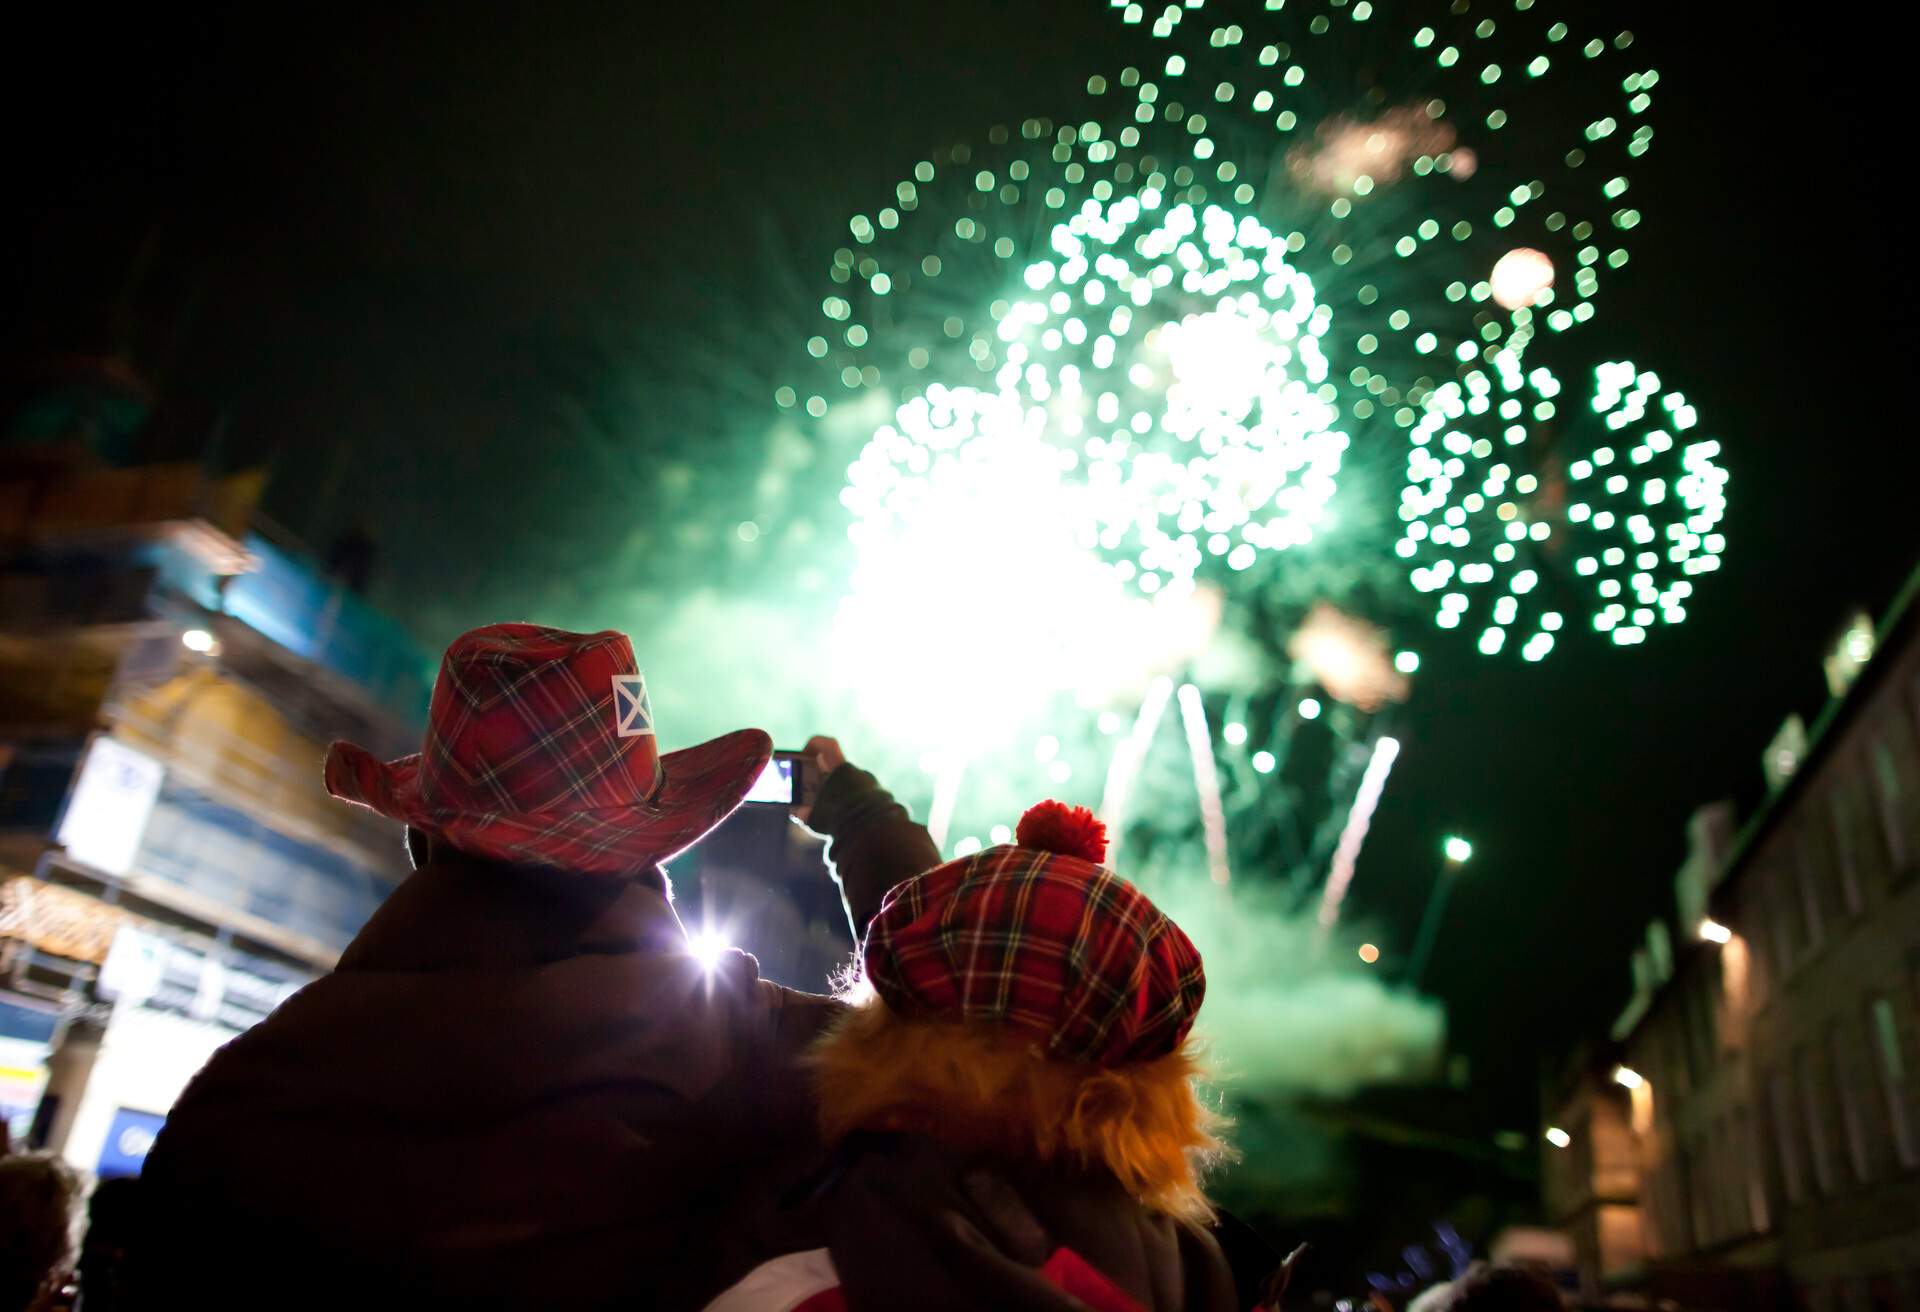 Two people with red hats looking at some fireworks